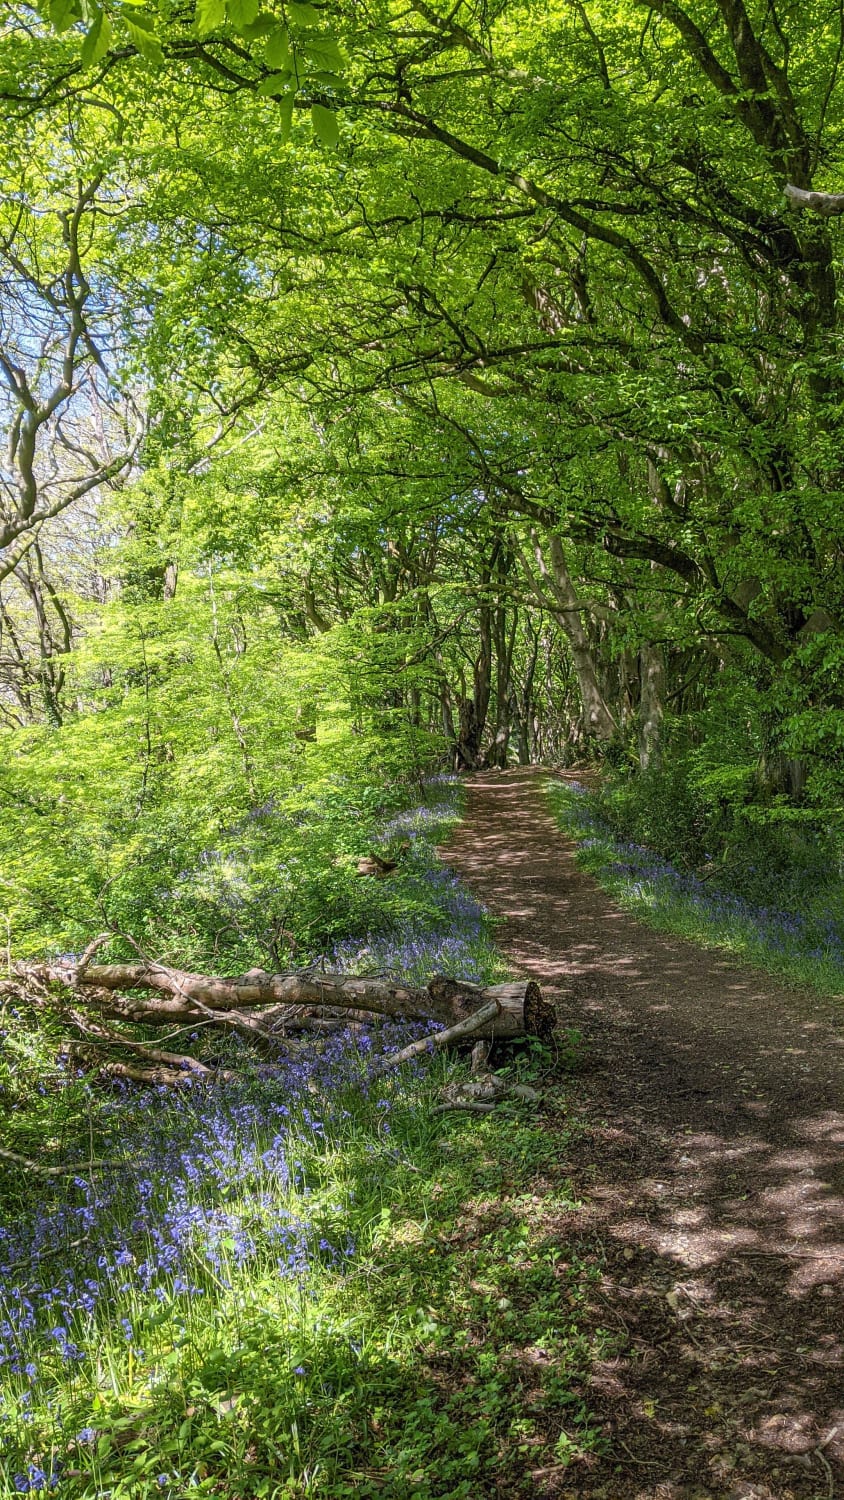 Bluebell Pathway in "The Shire"